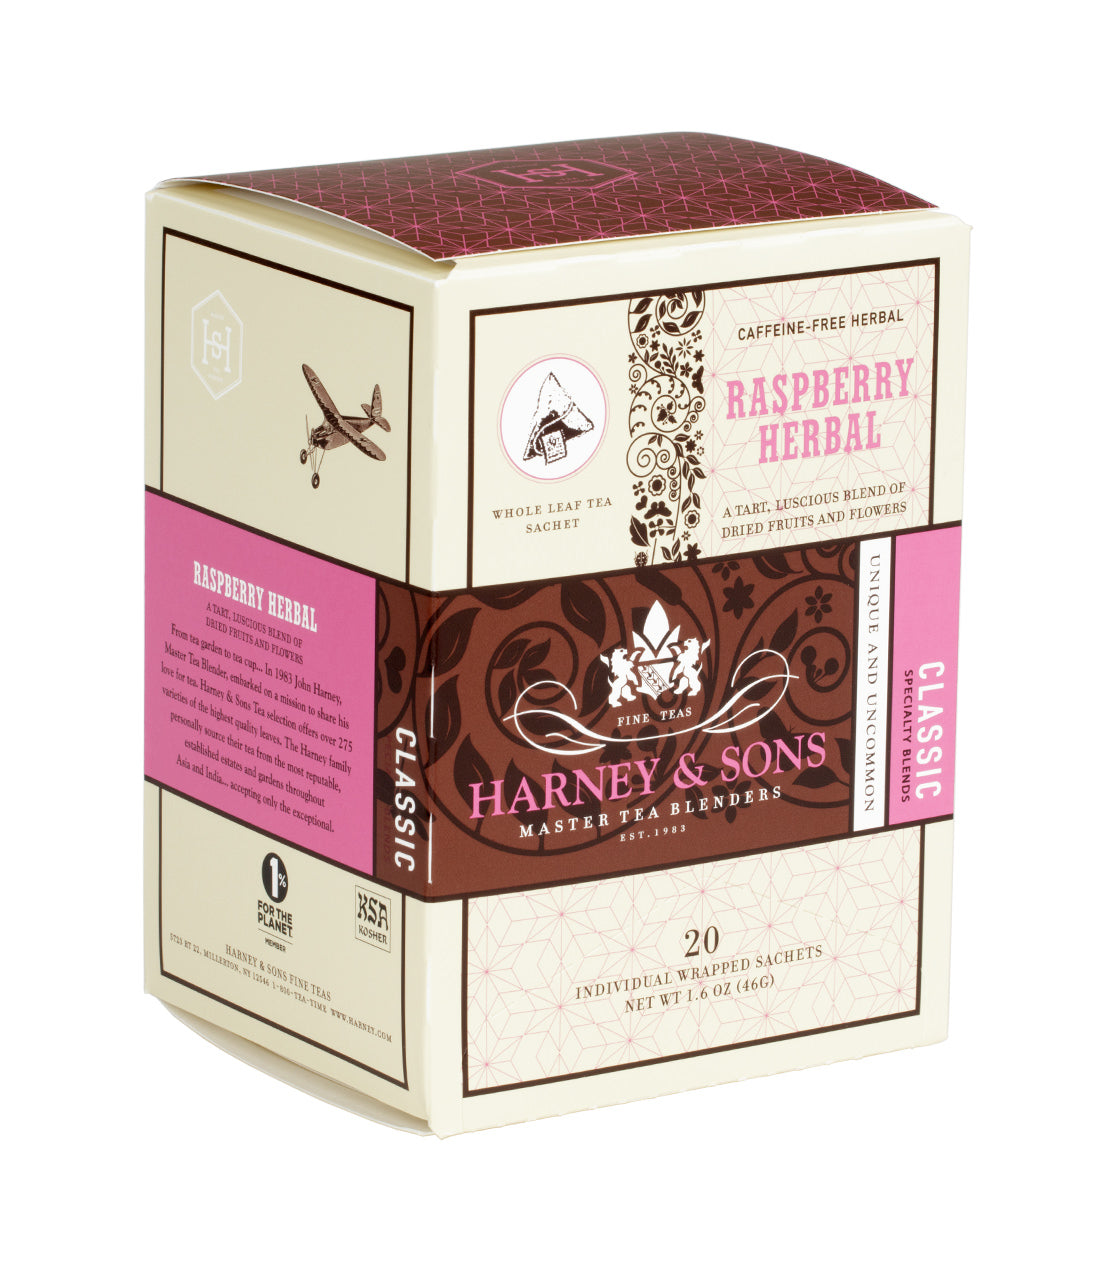 Raspberry Herbal, Box of 20 Individually Wrapped Sachets - Sachets Box of 20 Individually Wrapped Sachets - Harney & Sons Fine Teas